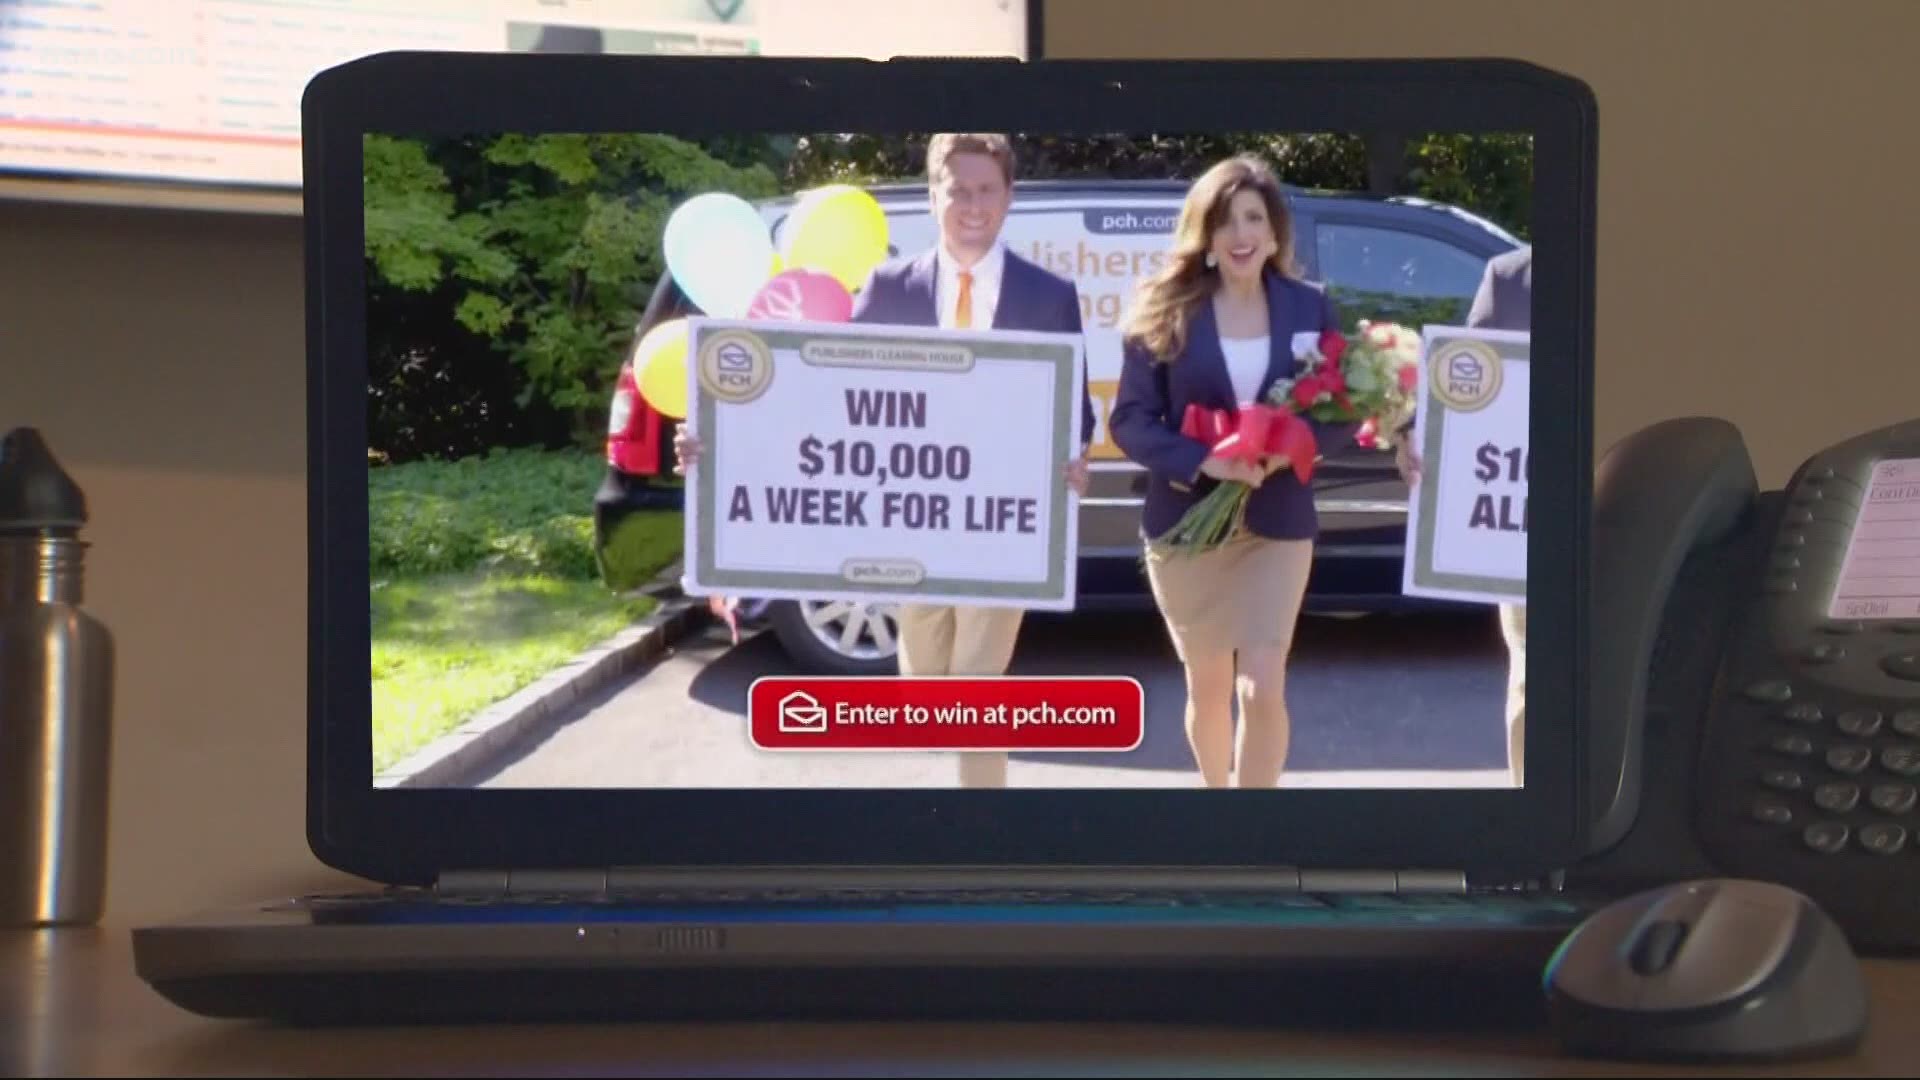 Ads are showing that many people are winning thousands of dollars from Publishers Clearing House.